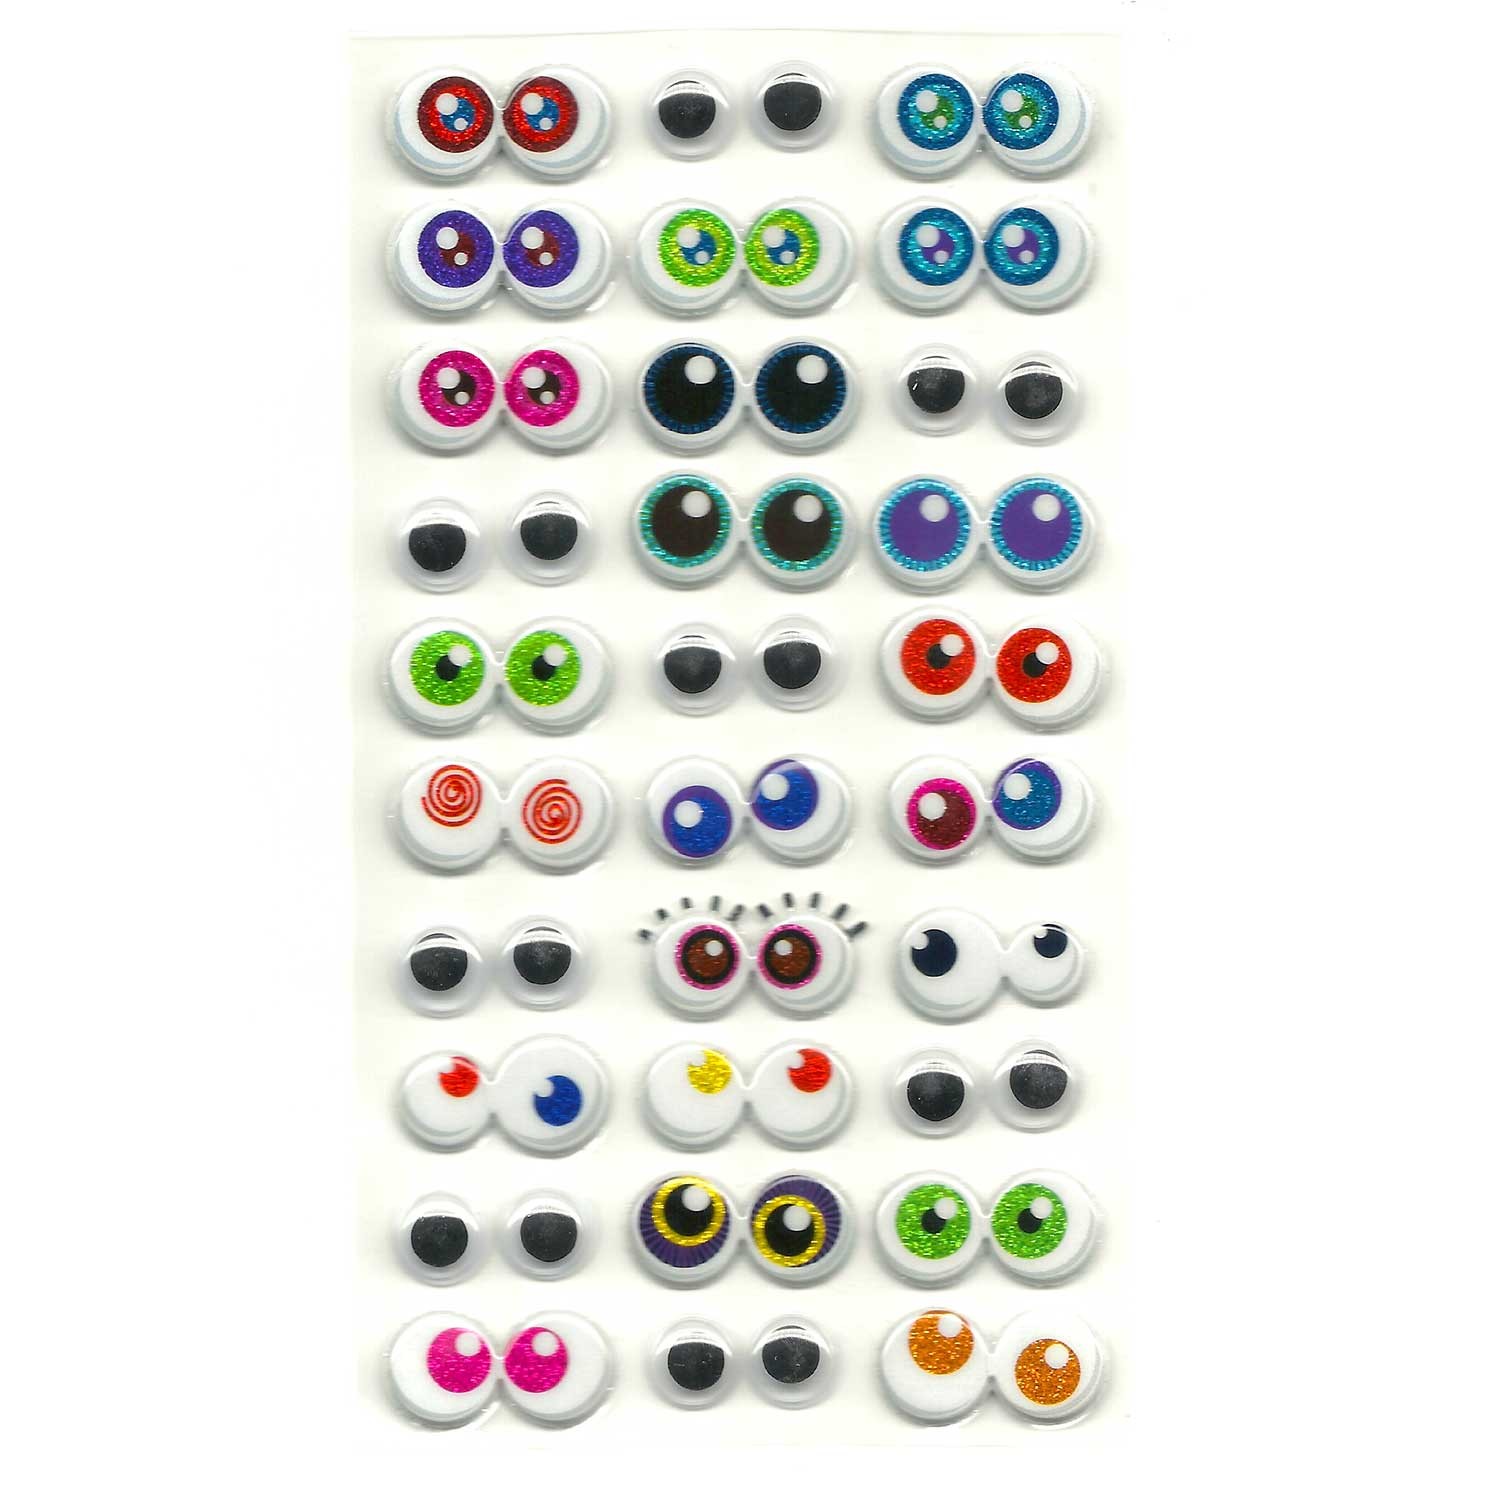 Googly Eyes Stickers